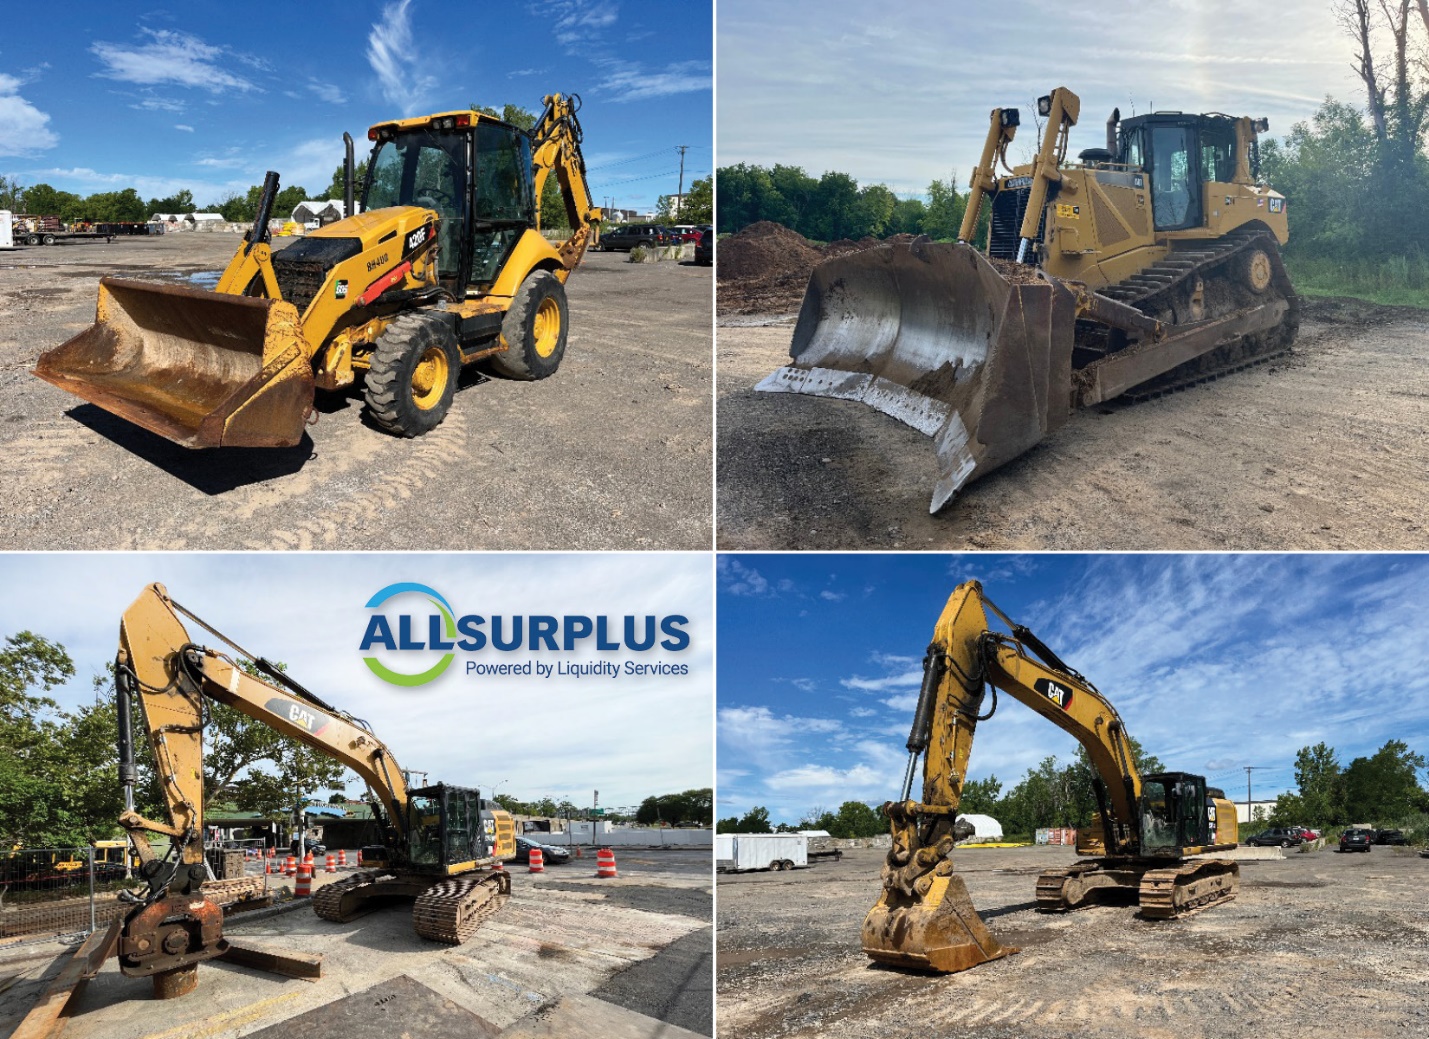 AllSurplus Selected to Conduct Online Heavy Equipment Auction for Leading Engineering and Construction Services Company